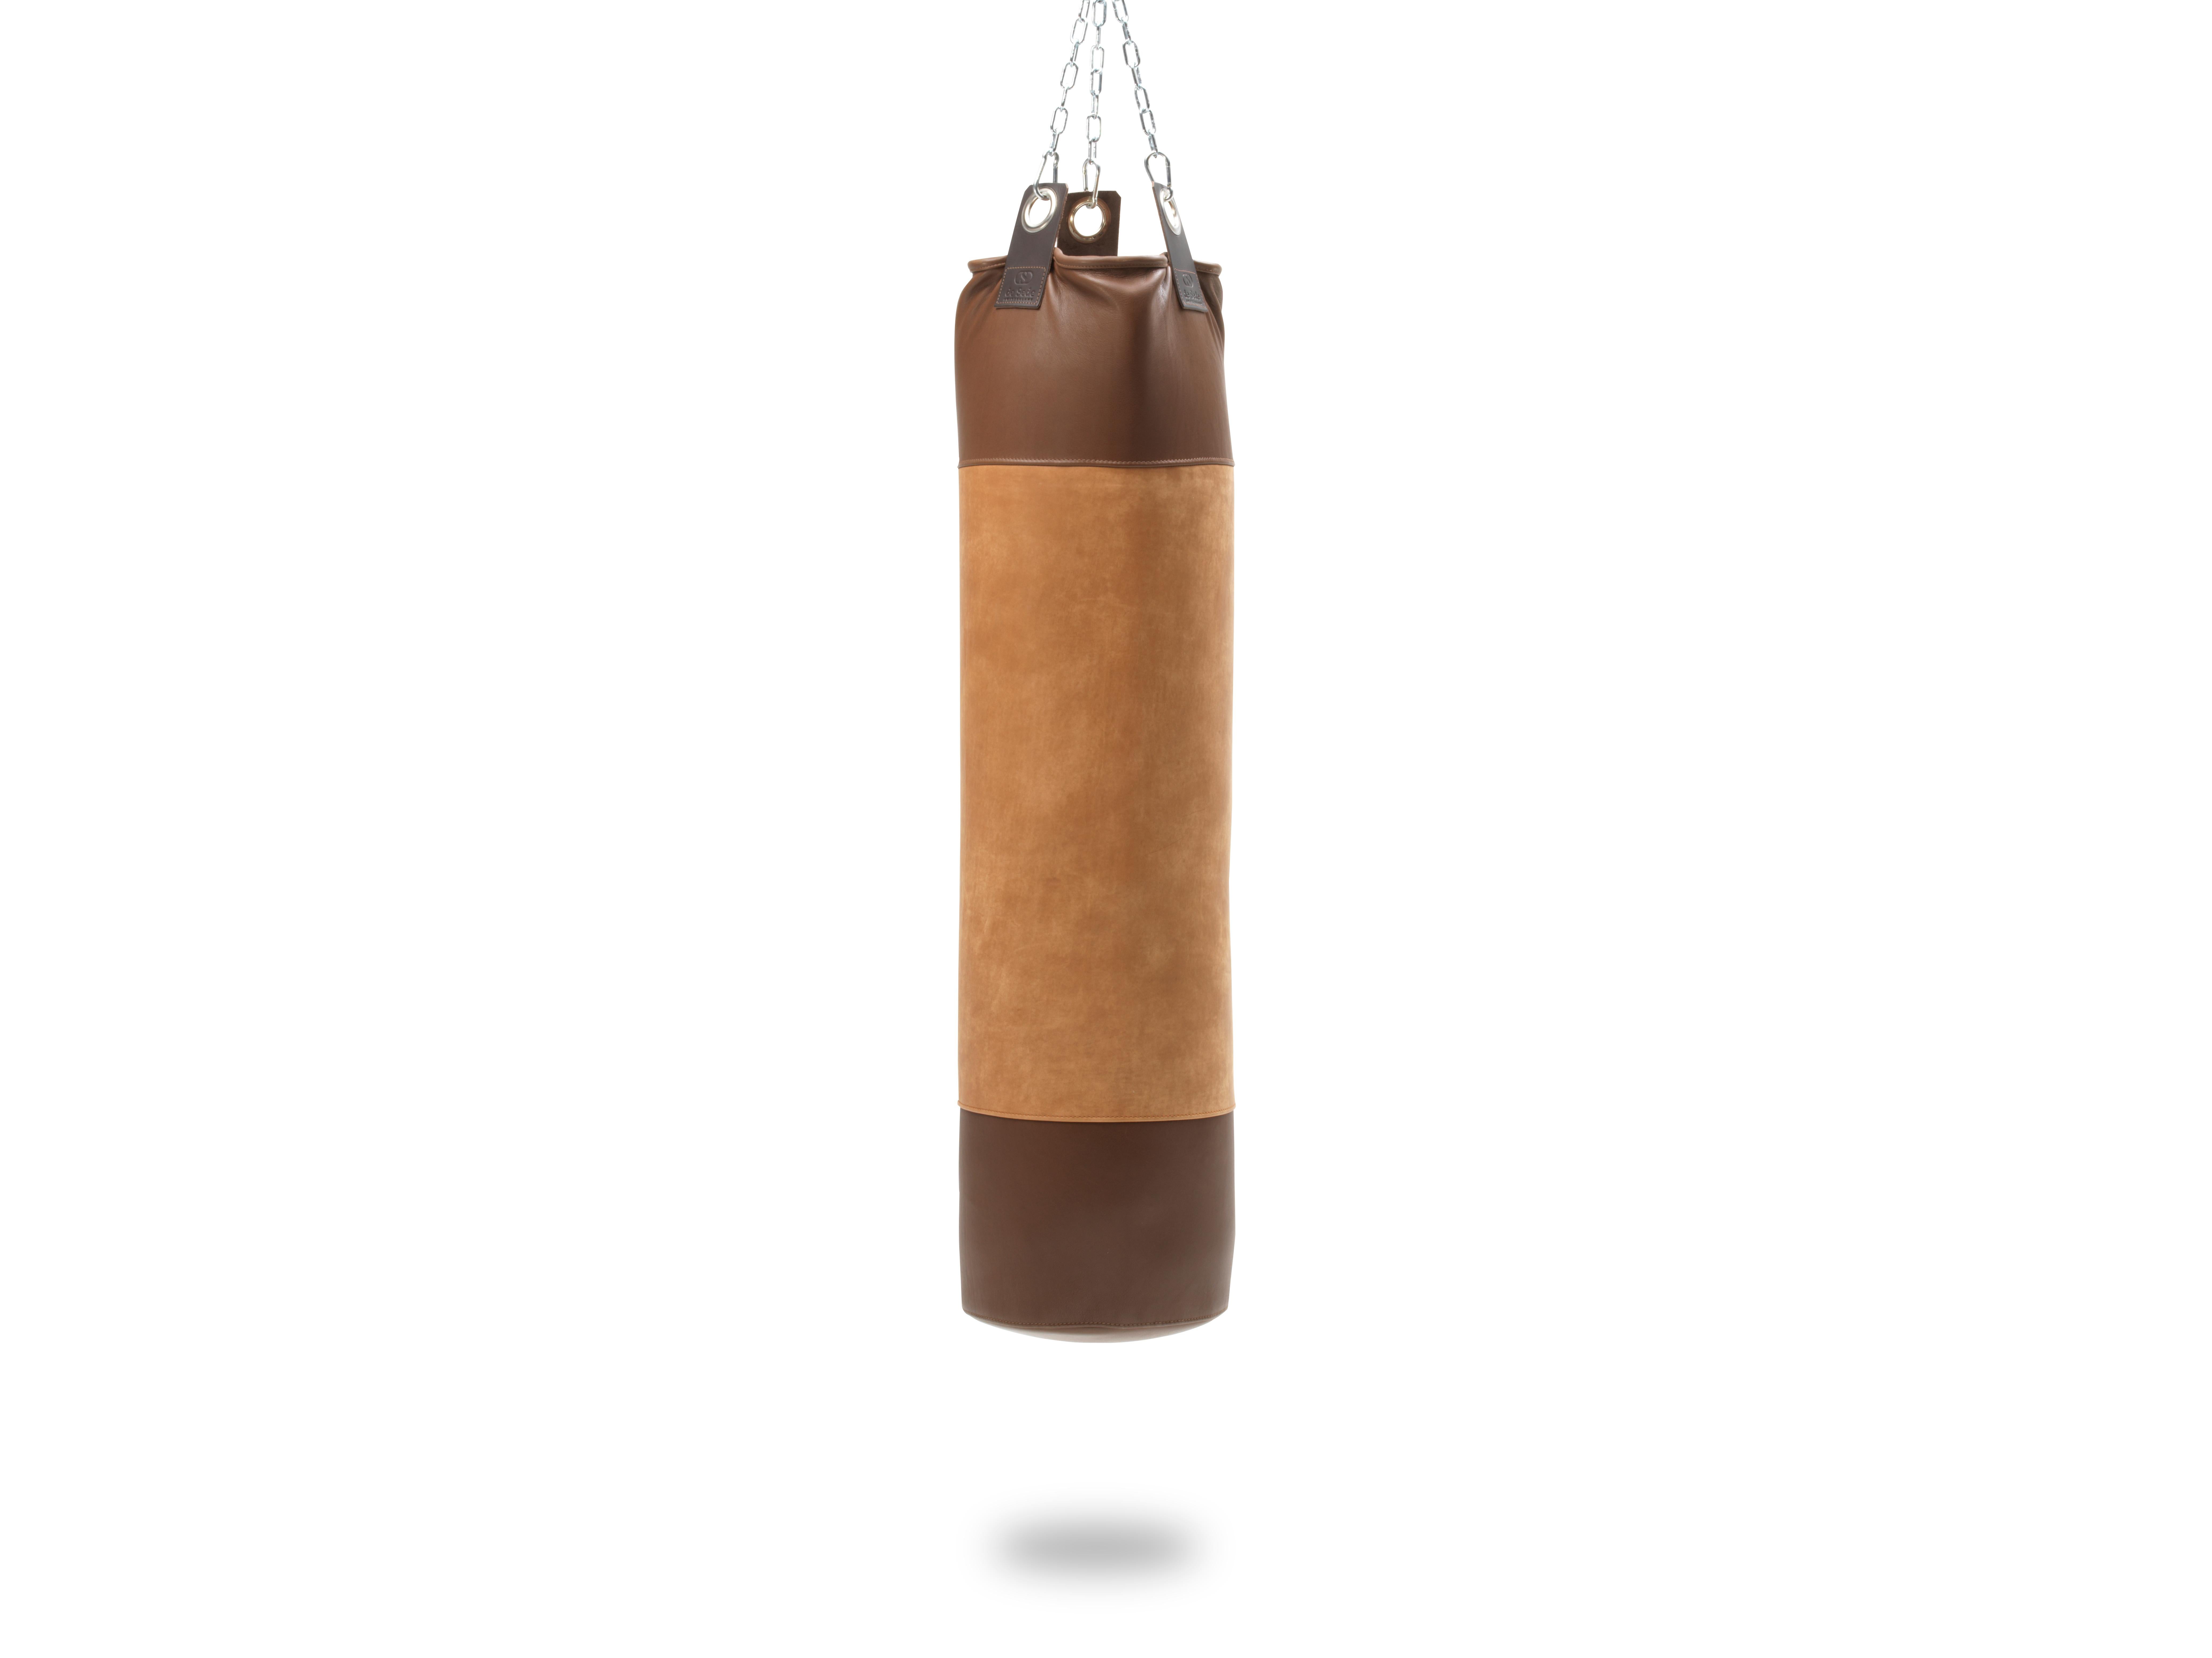 DS-2878 Punch Bag by De Sede
Dimensions: D 35 x H 135 cm
Materials: leather

Prices may change according to the chosen materials and size. 

Matching to the re-edition of the DS-2878, de Sede boxing fans can get their hands on a very special